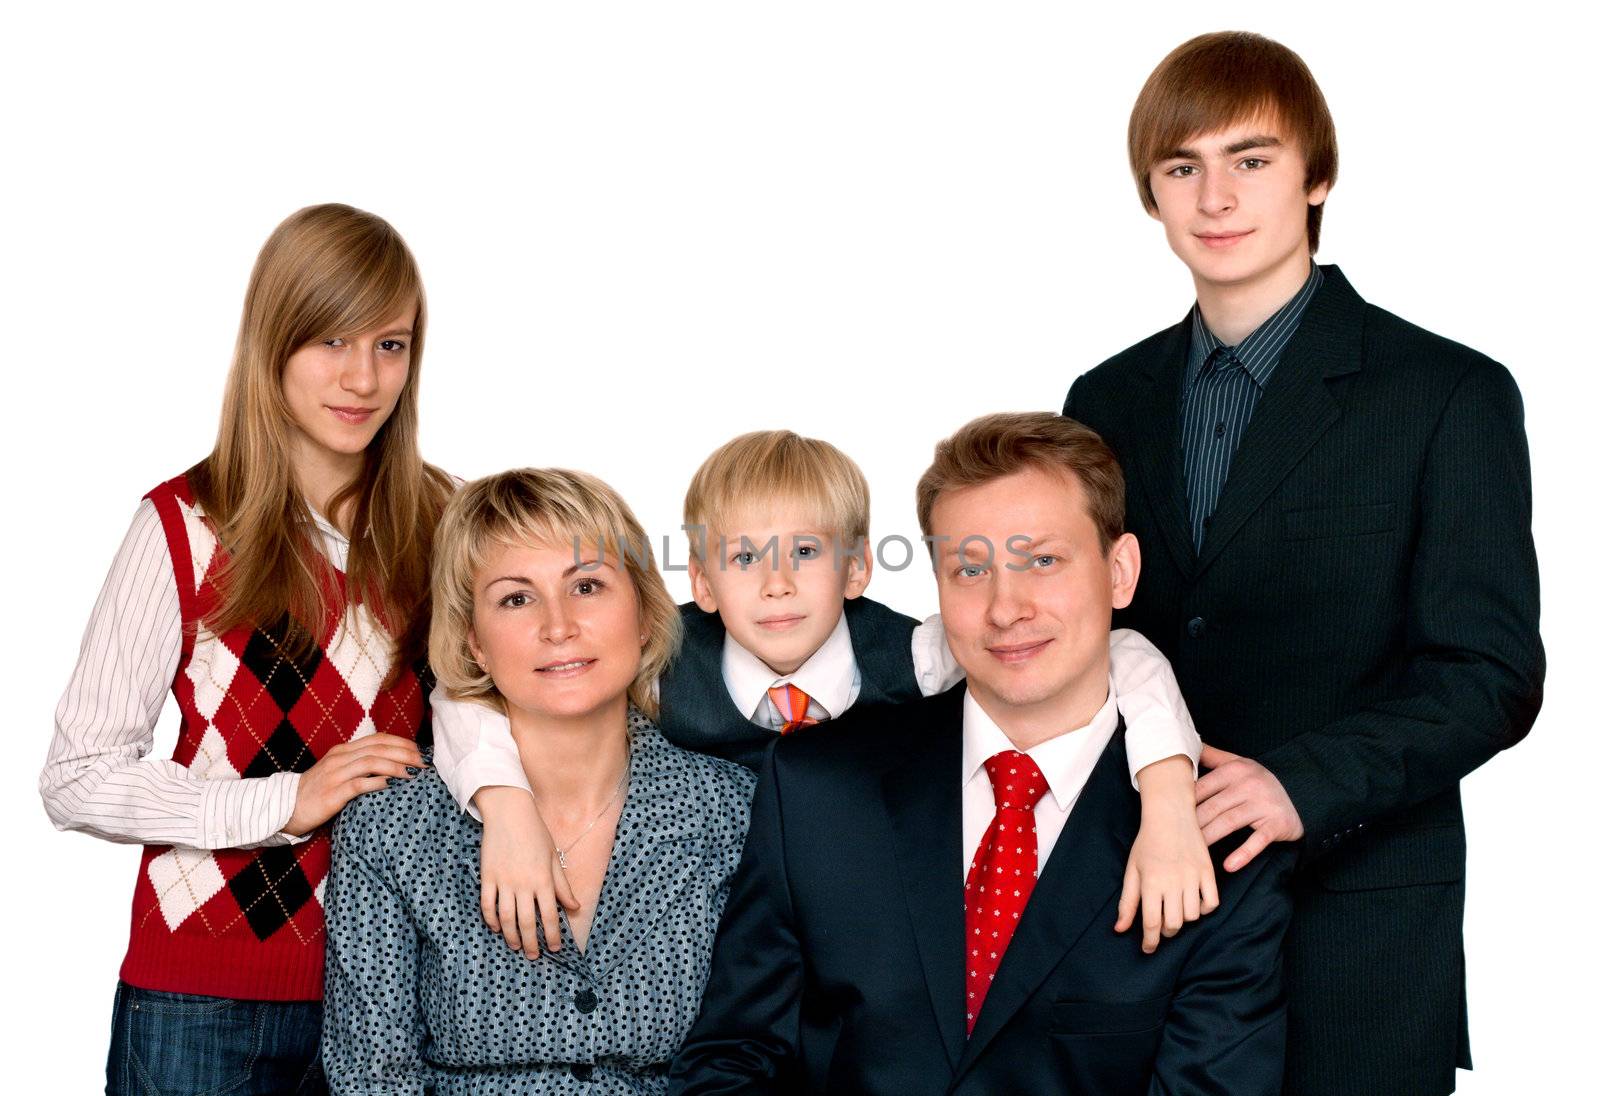 Merry big family portrait on white background.